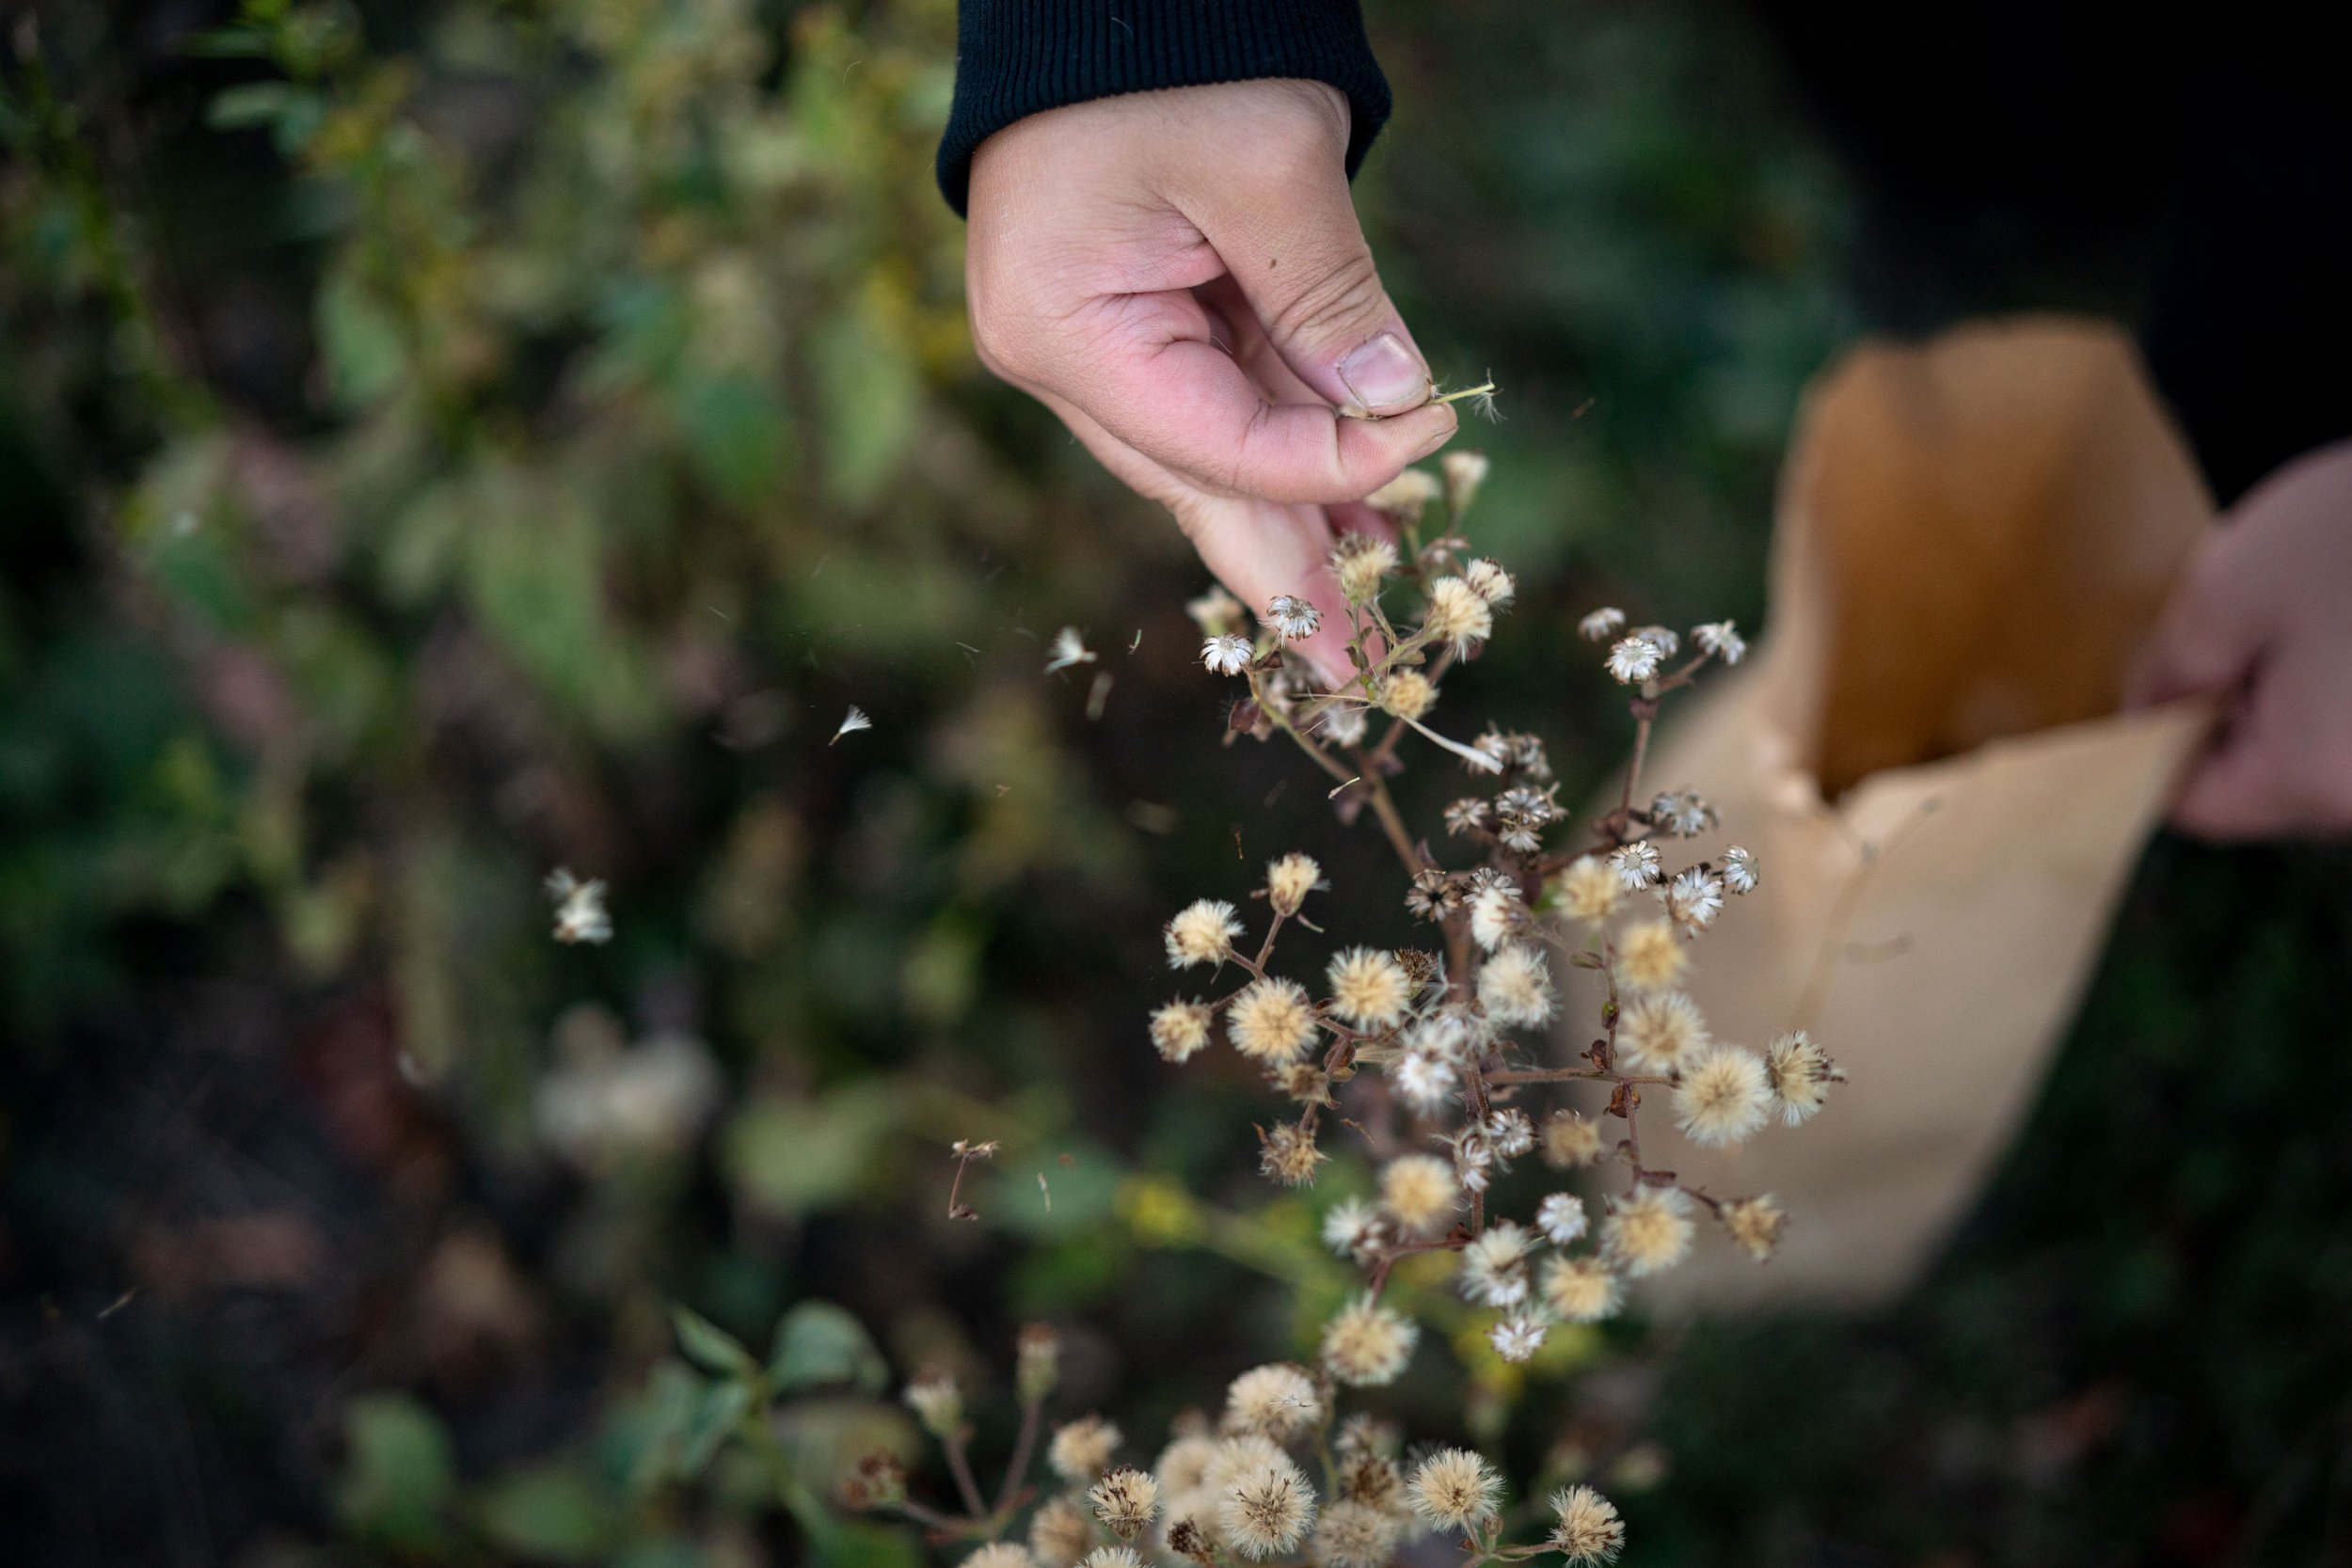  A teen a part of the Urban Roots Conservation Program collects seeds from native plants at Hazelwood Park Oct. 18, 2022 in Maplewood, Minn. For many of the teens working for Urban Roots, this is their first job. Every summer, the organization hires 